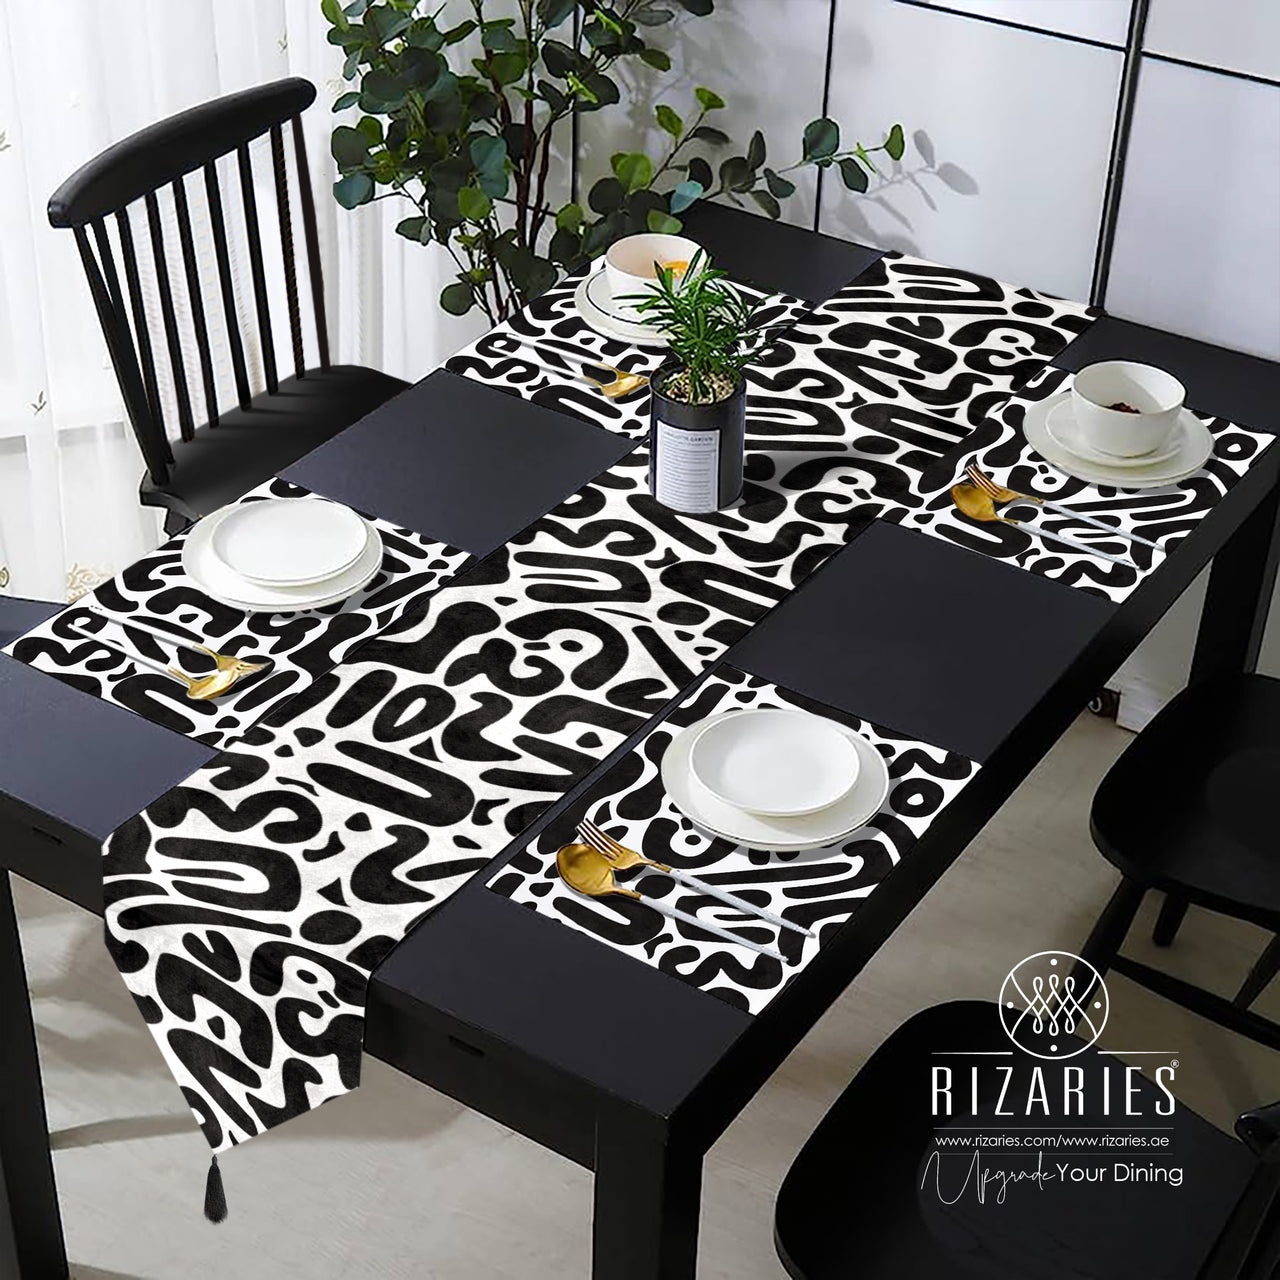 Black & White Abstract Table Style Set